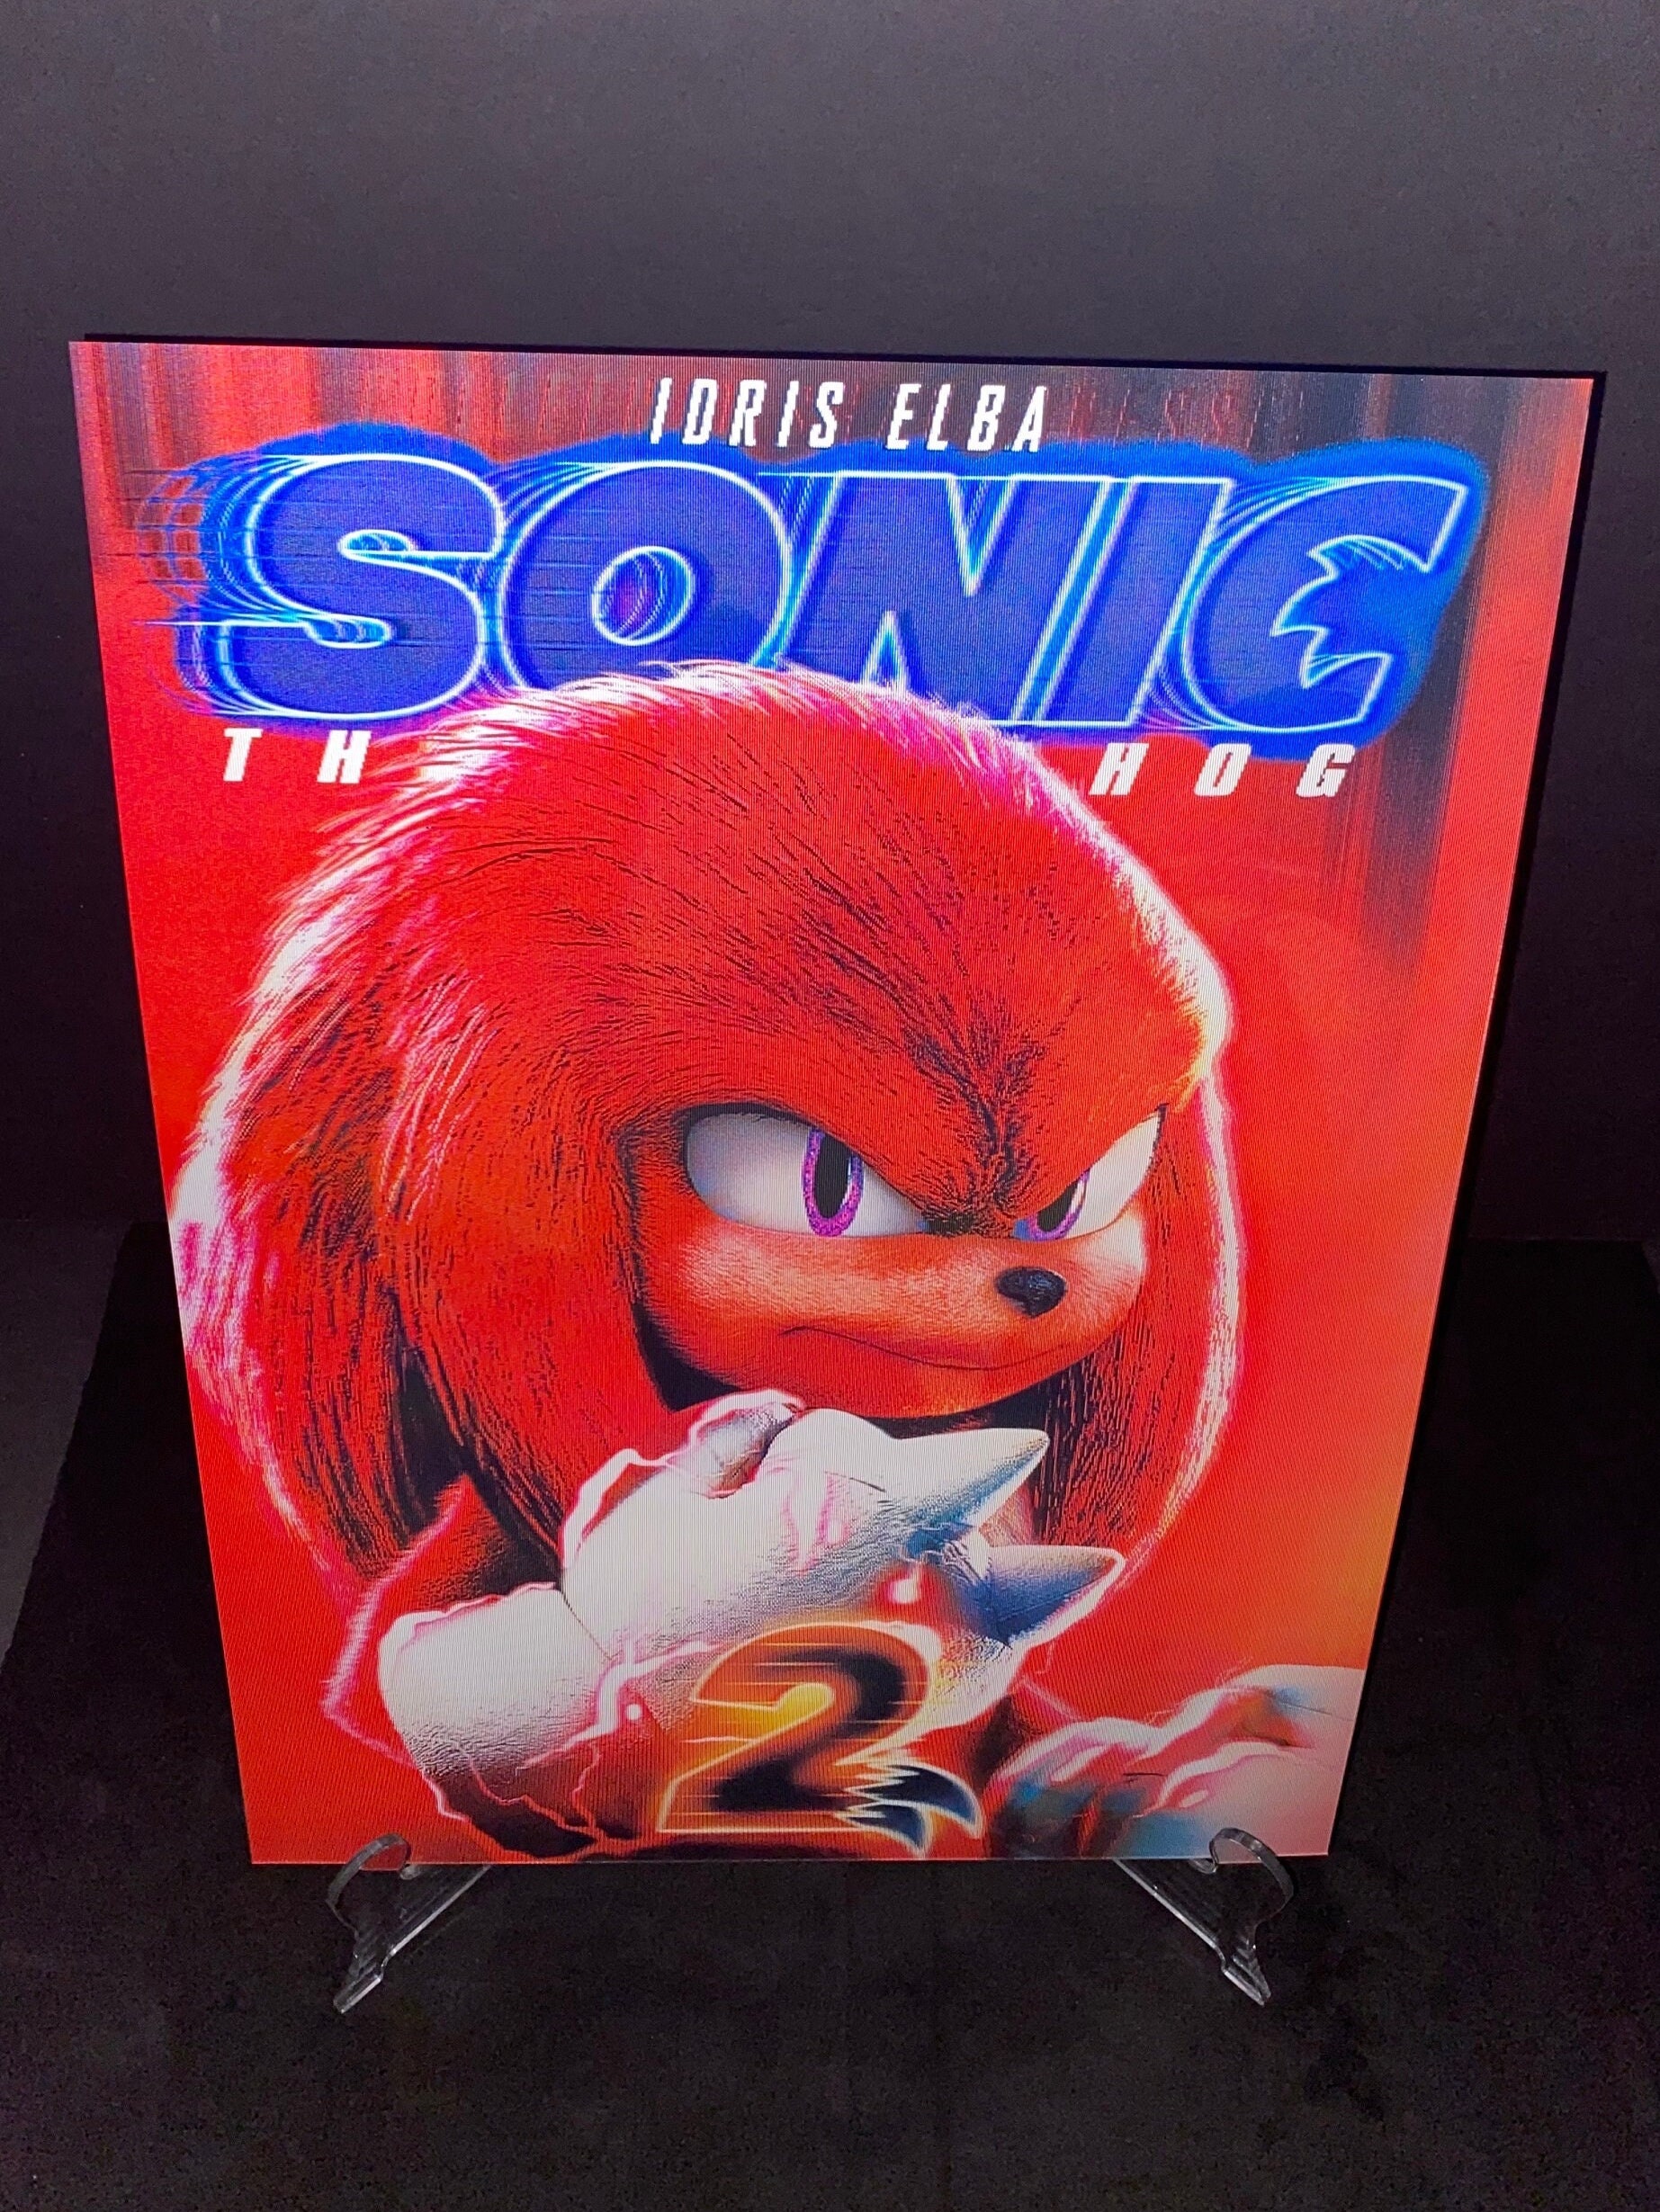 Sonic the Hedgehog-Sonic- 3D Poster 3DLenticular Effect-3 Images In One